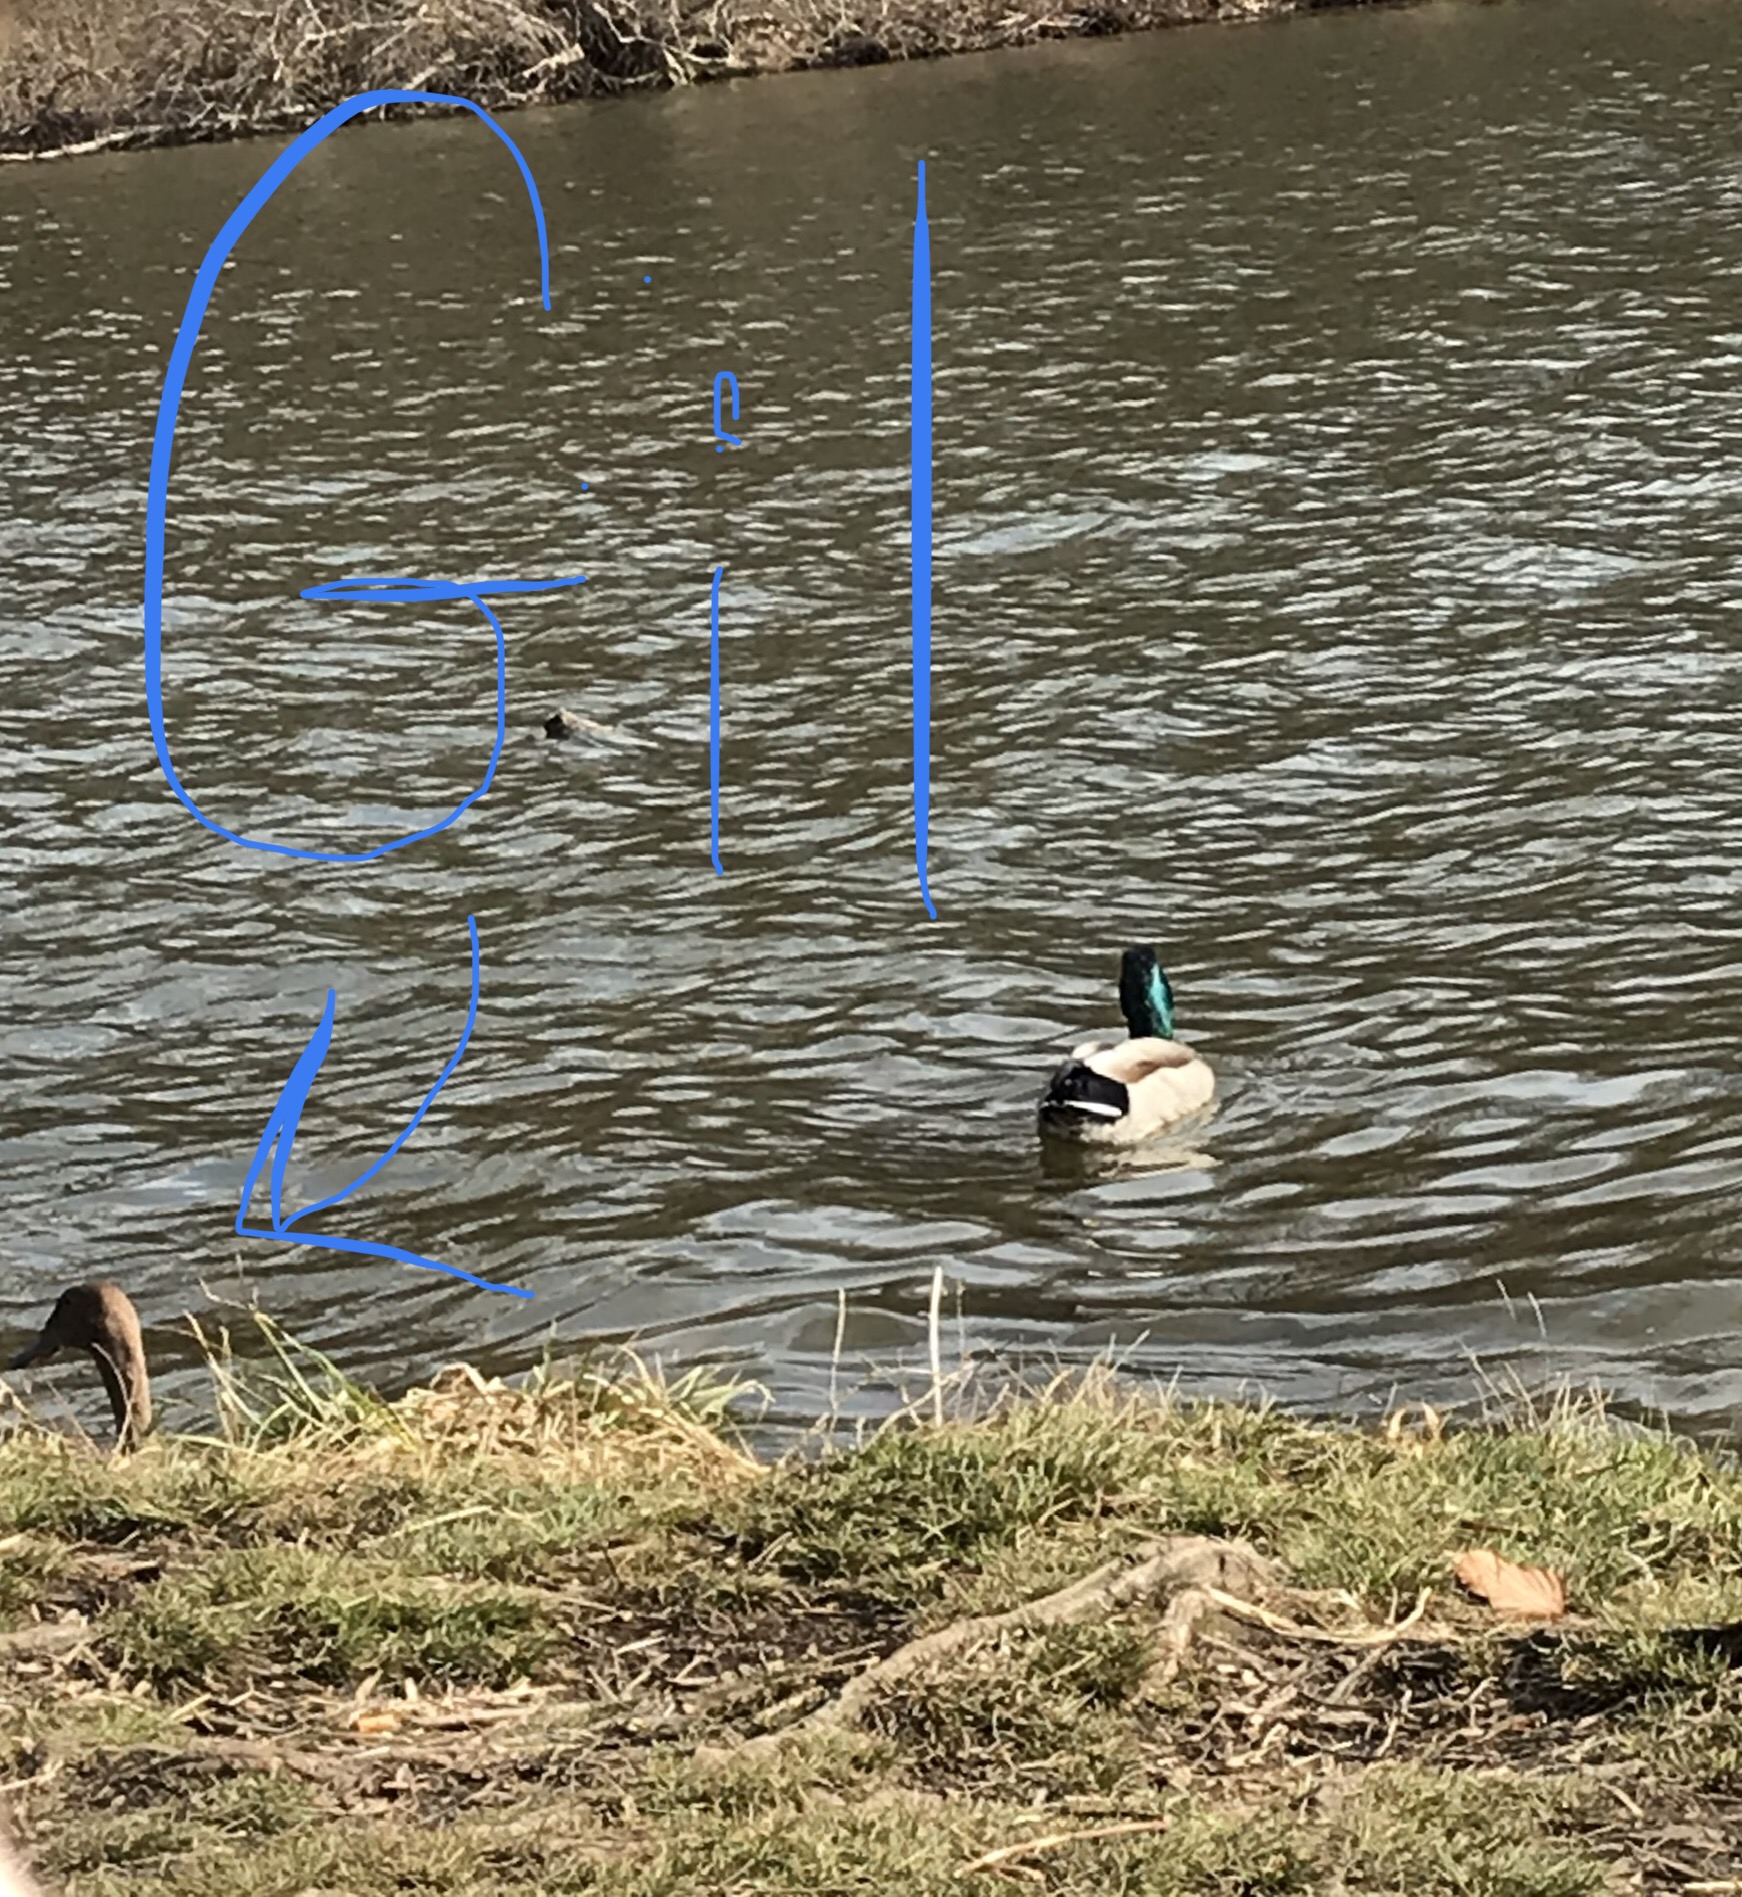 Gil swims with wild friend at lake